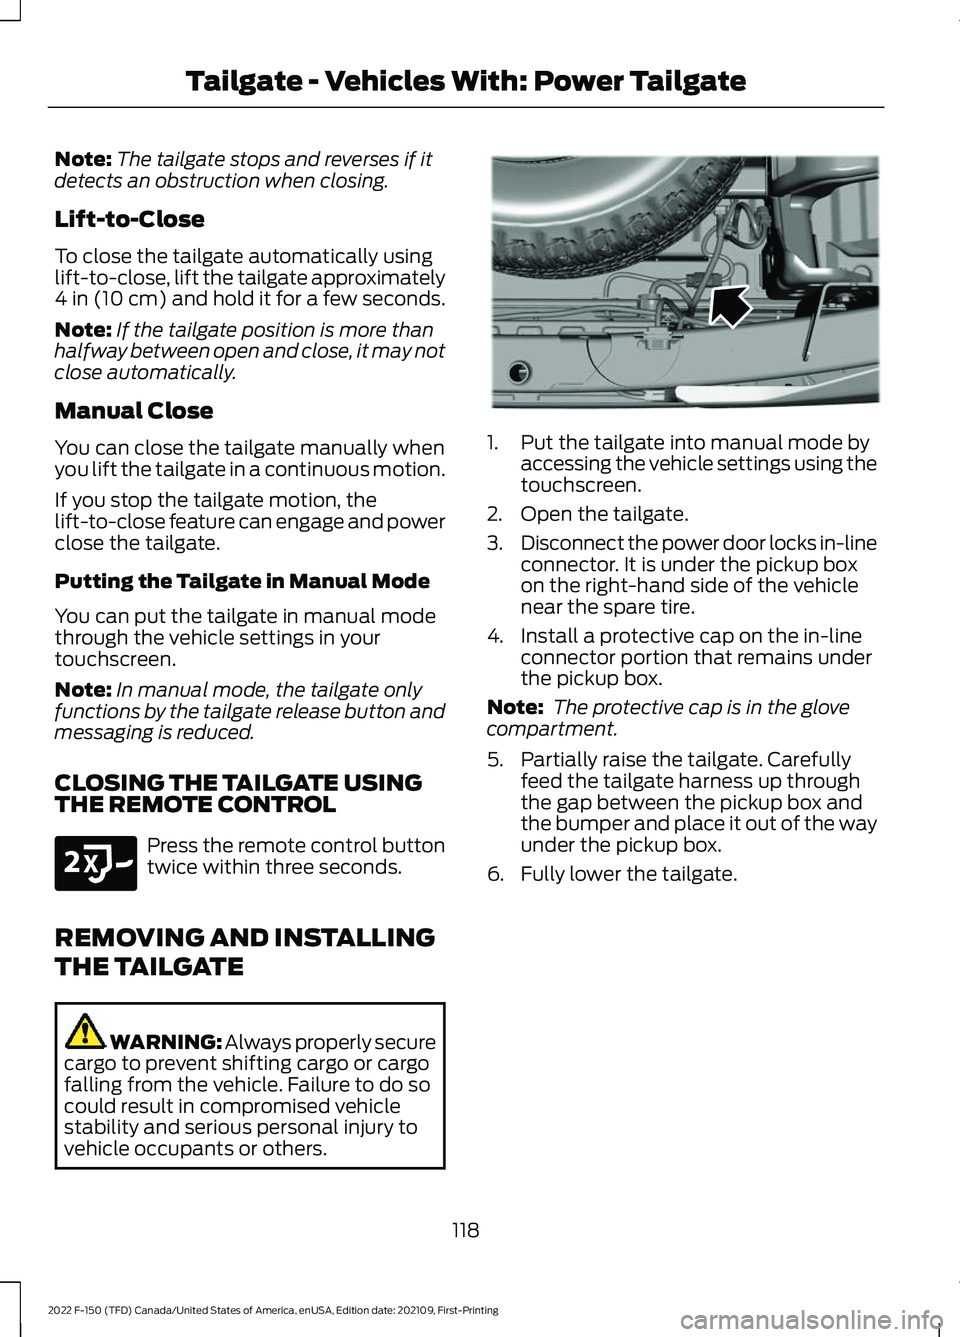 FORD F-150 2022 Service Manual Note:
The tailgate stops and reverses if it
detects an obstruction when closing.
Lift-to-Close
To close the tailgate automatically using
lift-to-close, lift the tailgate approximately
4 in (10 cm) and